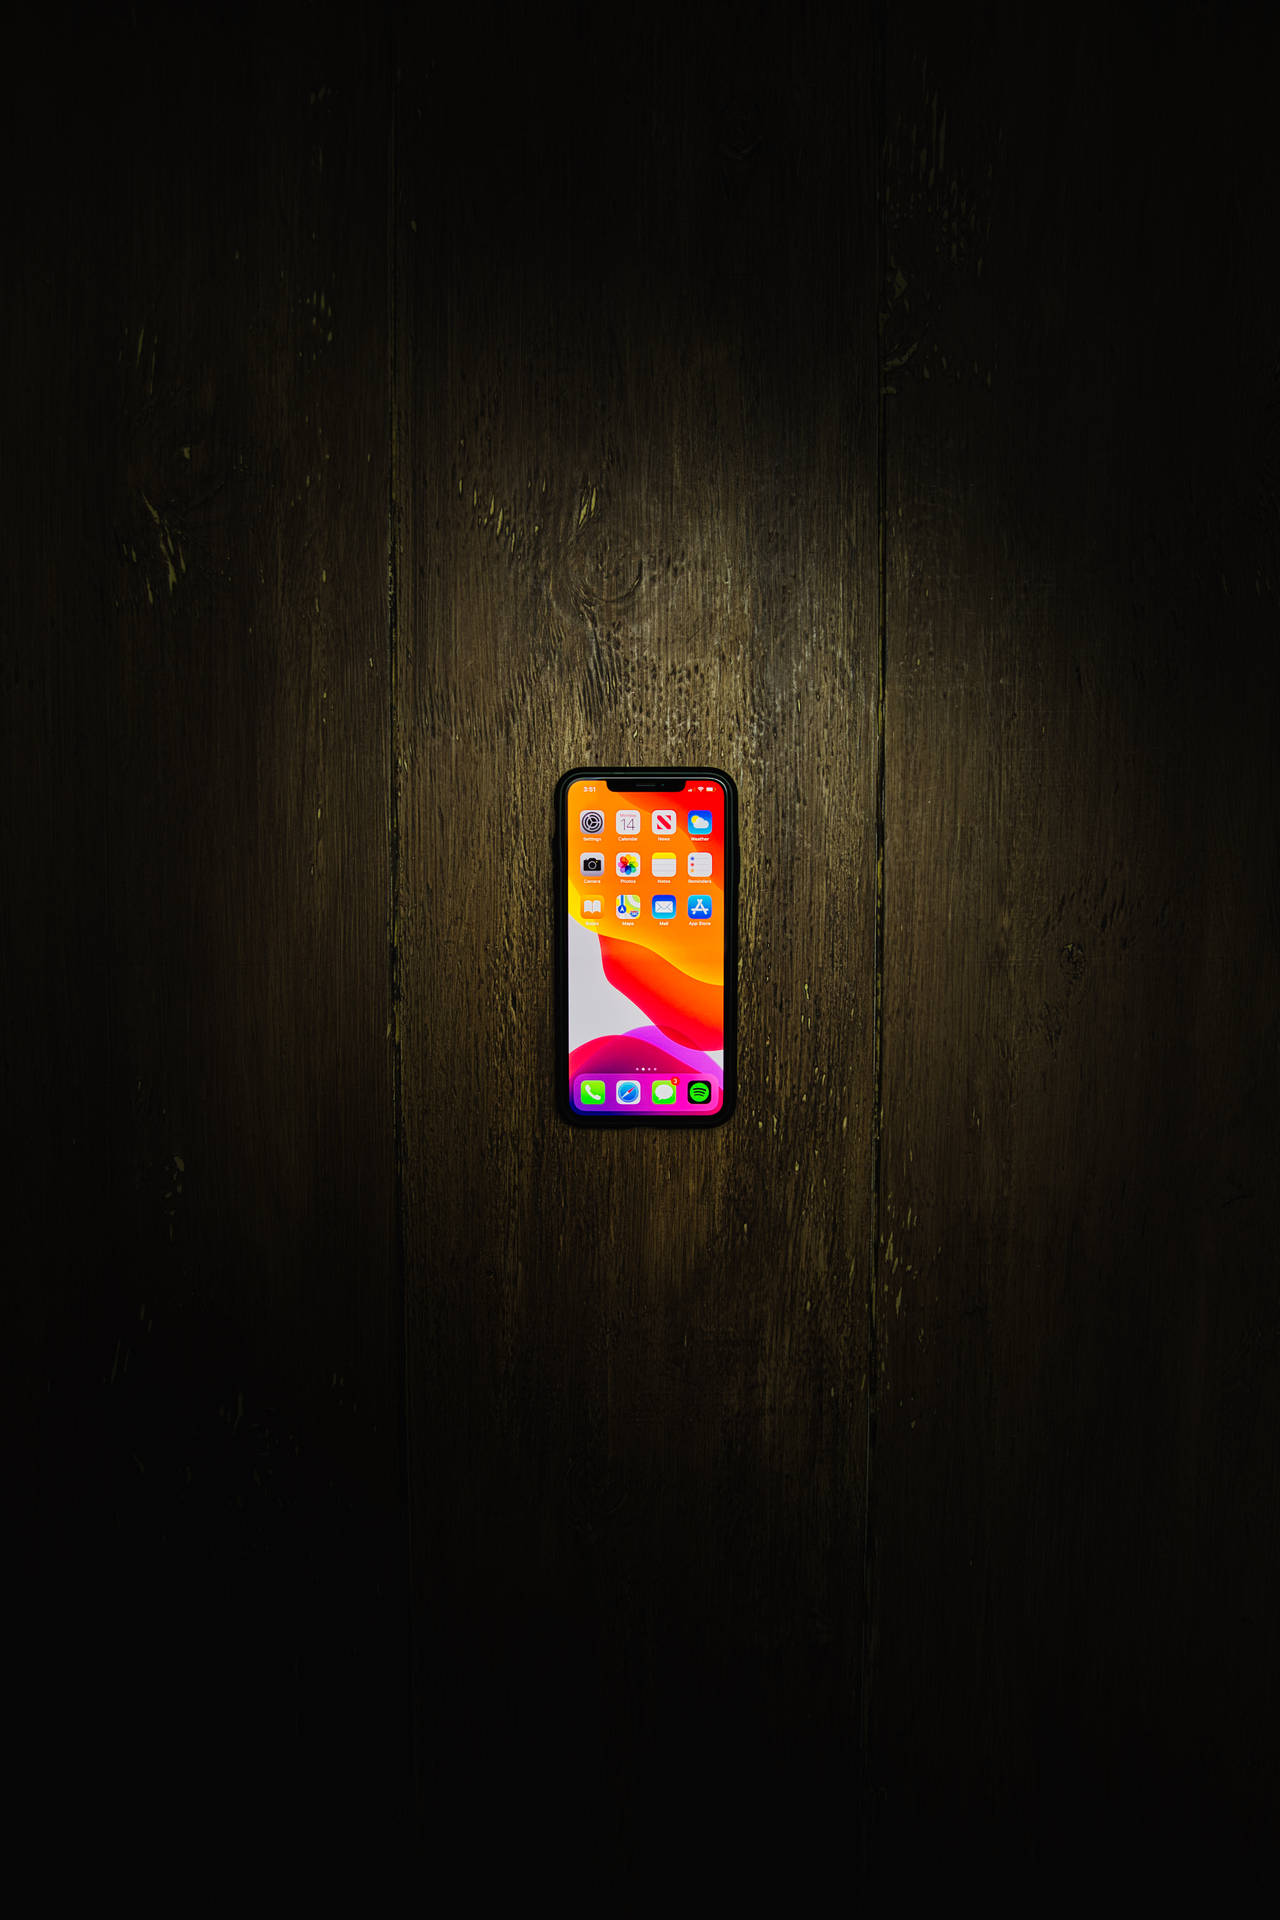 Iphone Xs Max On Wooden Floor Background